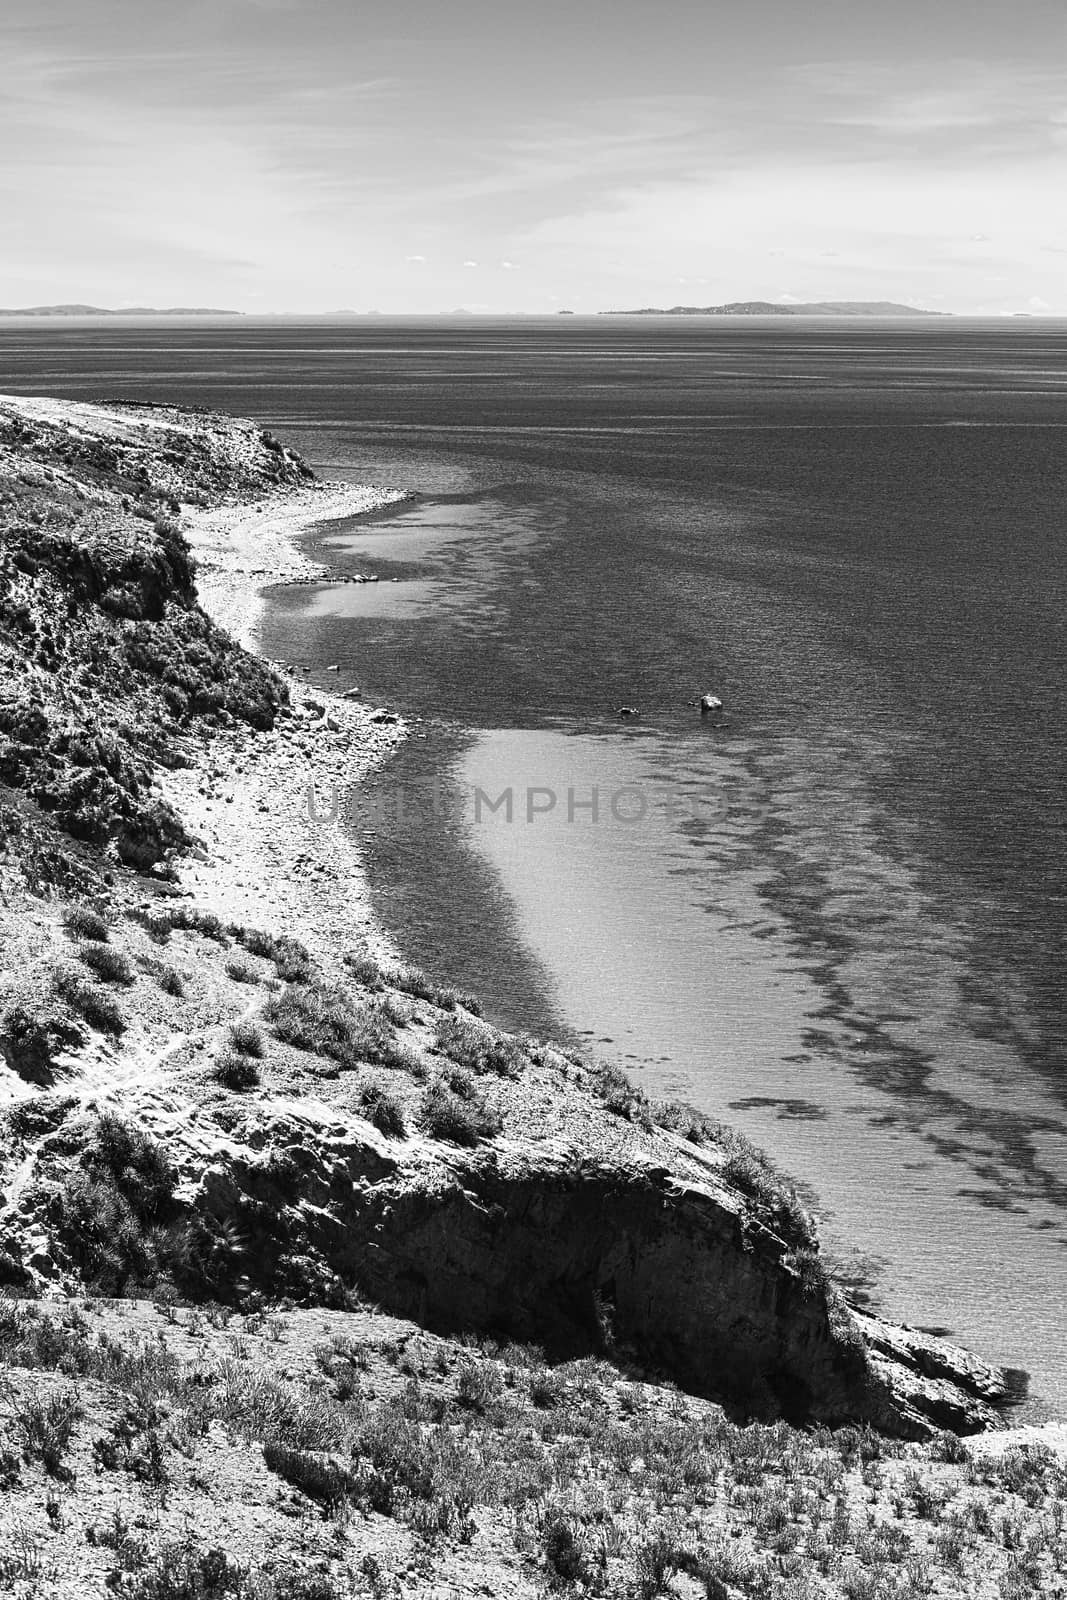 Monochrome image of the shoreline on the northern tip of the popular travel destination Isla del Sol (Island of the Sun) in Lake Titicaca close to Copacabana in Bolivia